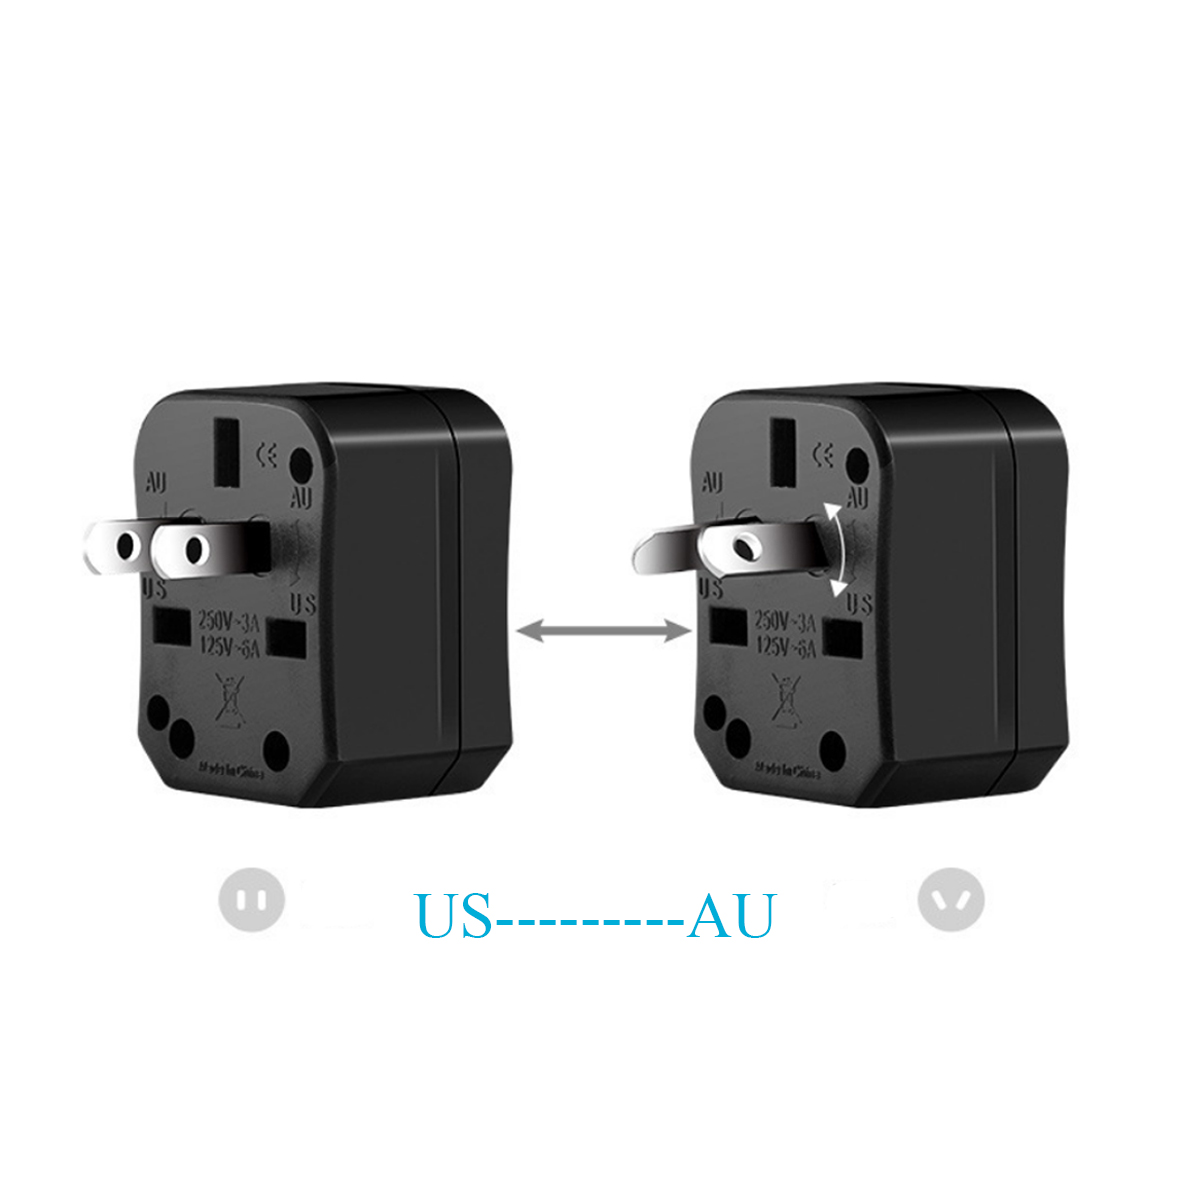 Travel-Adapter-Universal-Power-Adapter-with-2-USB-Ports-Wall-Charger-AC-Power-Plug-1304296-3